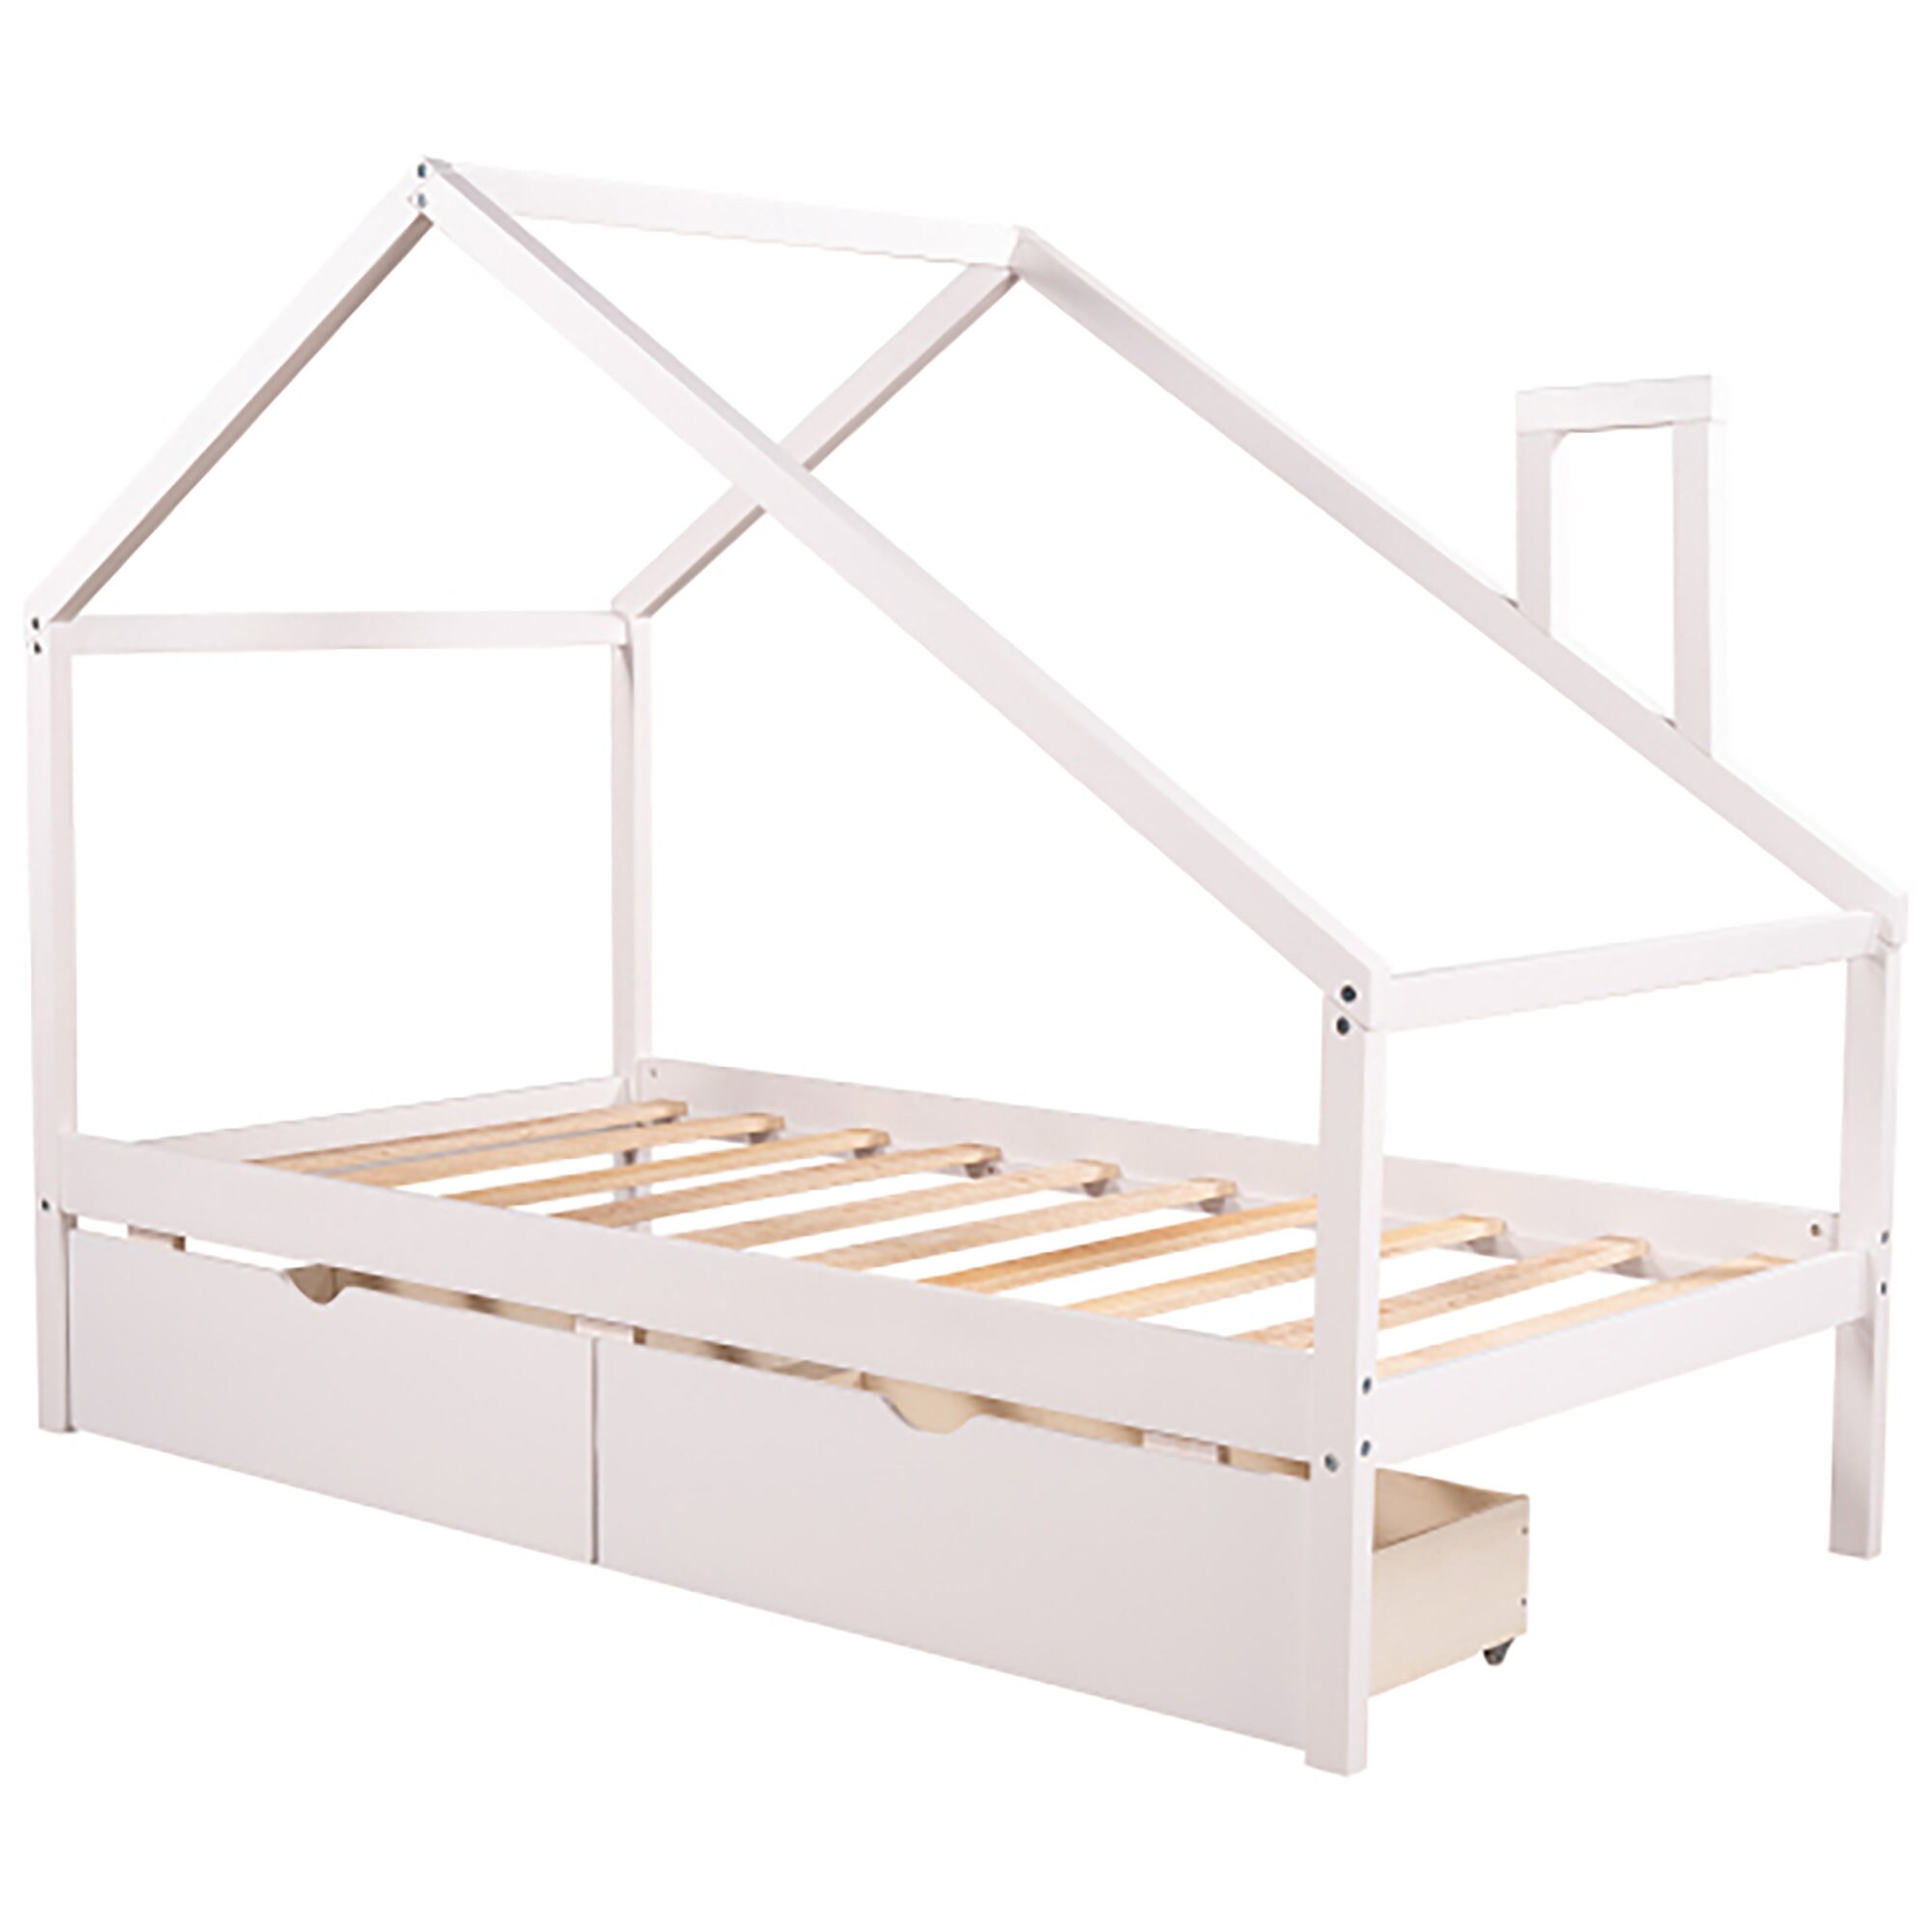 Daybed With Two Pull-out Drawers and Roof House Bed Frame for - Etsy